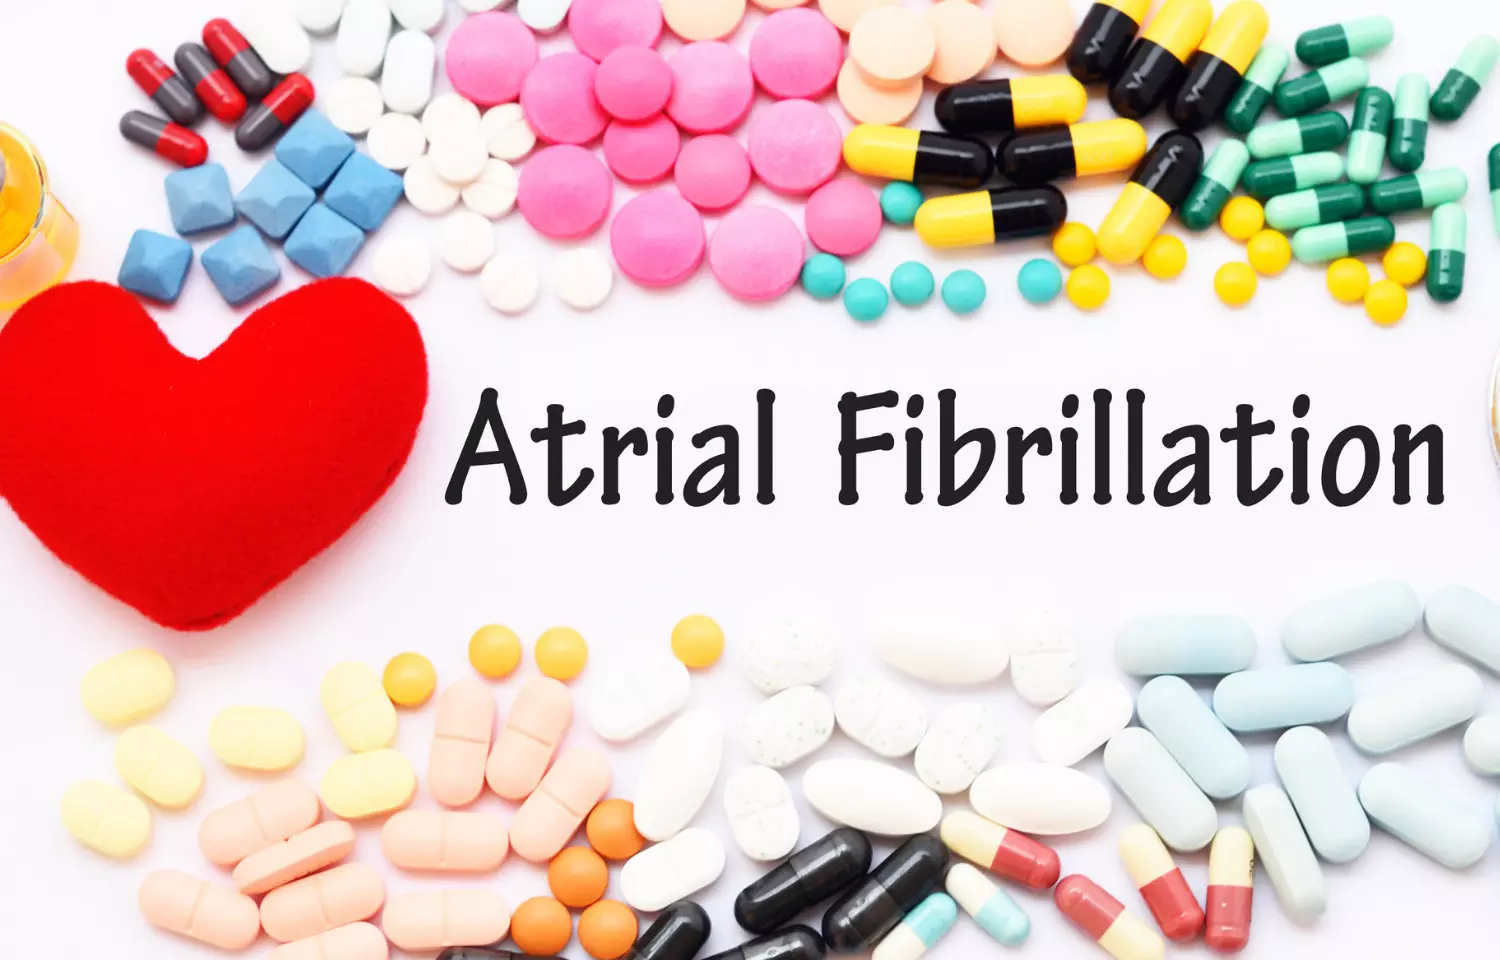 Atrial fibrillation and dementia clearly associated